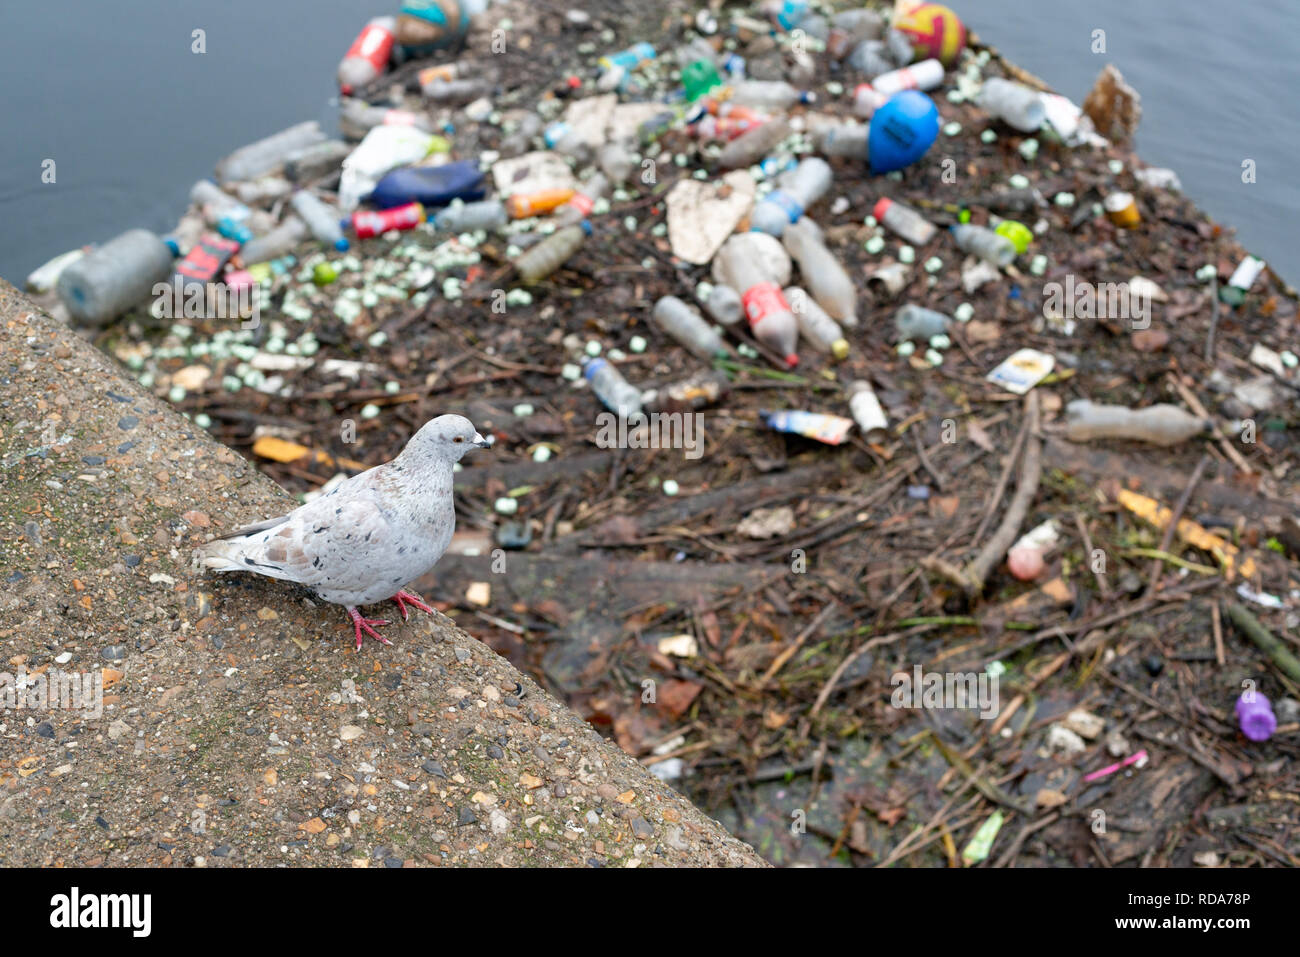 Discarded rubbish found along the River Lea in London, UK Stock Photo